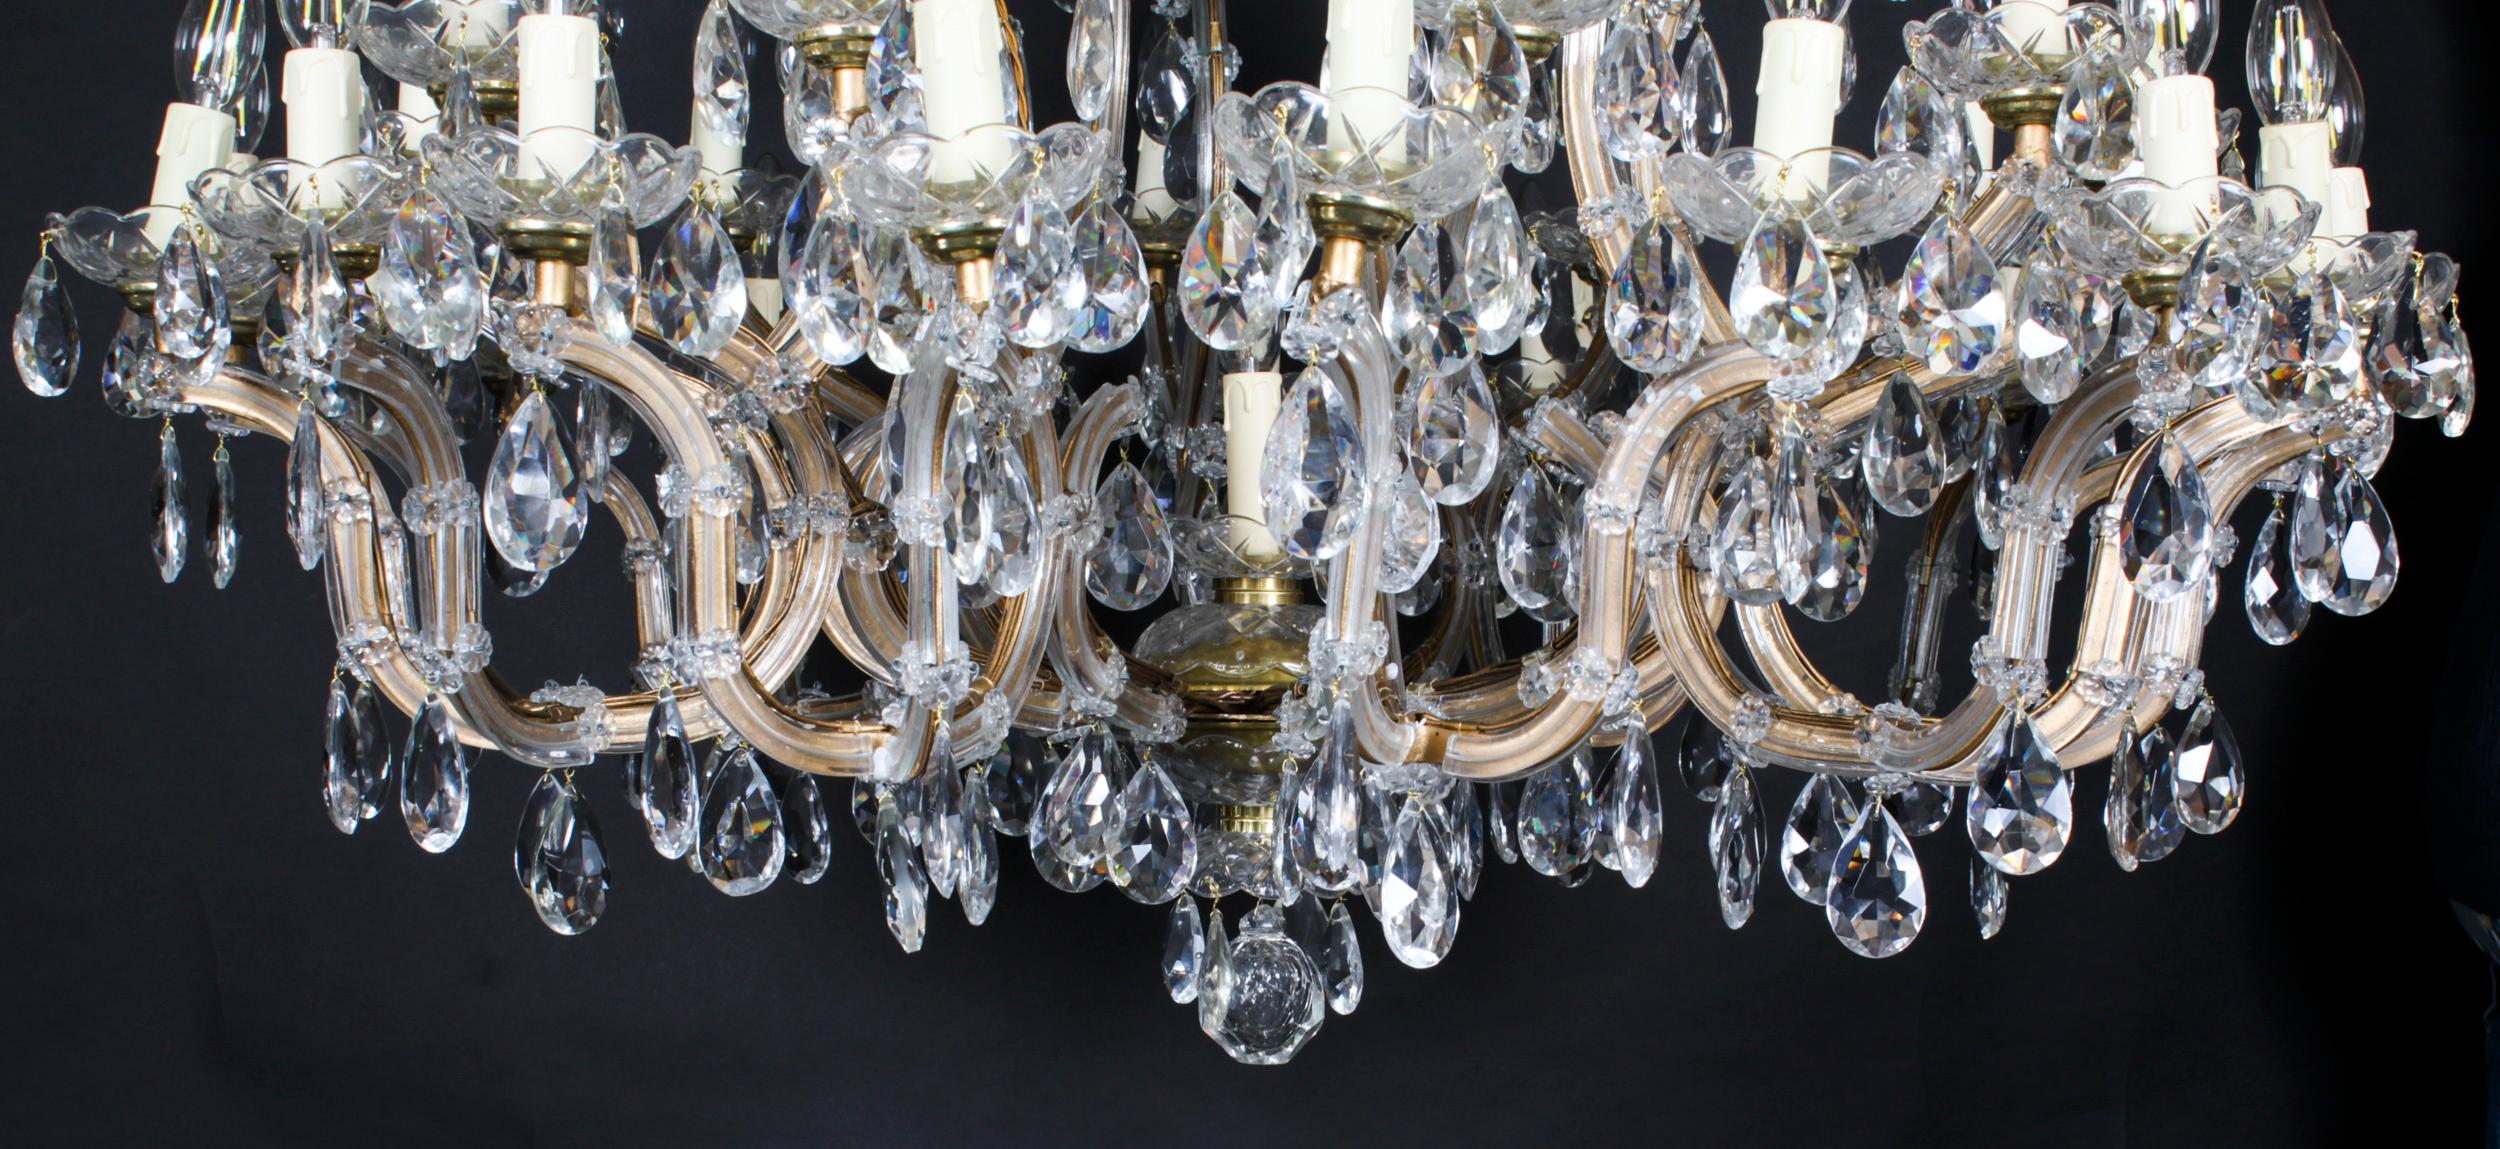 Antique Pair English 41 light Ballroom Crystal Chandeliers 1920s For Sale 7